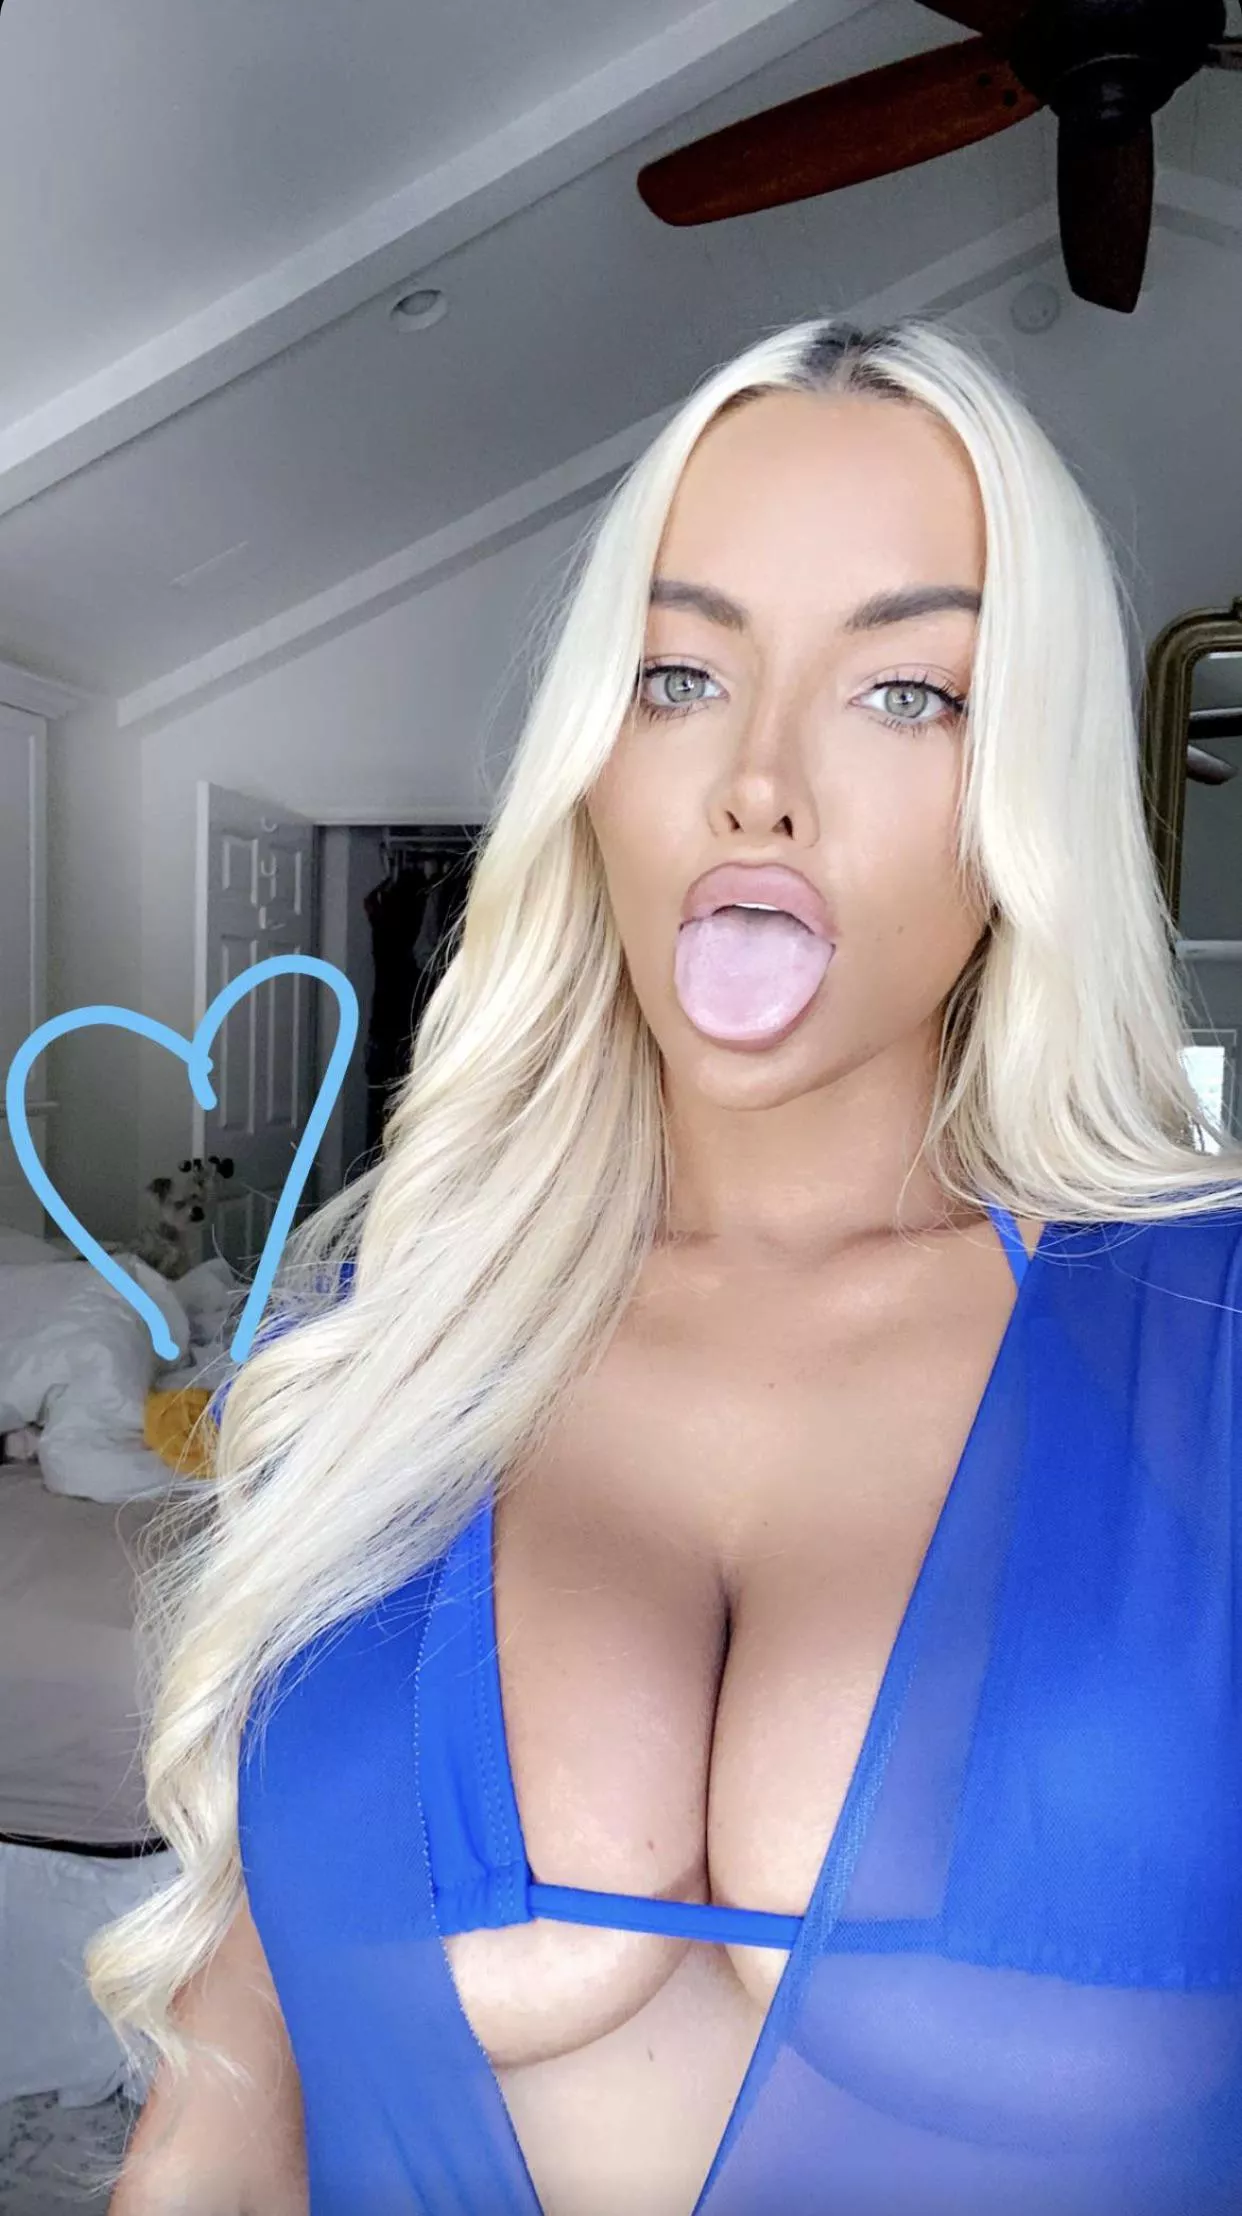 Shes Ready Nudes Lindseypelas Nude Pics Org